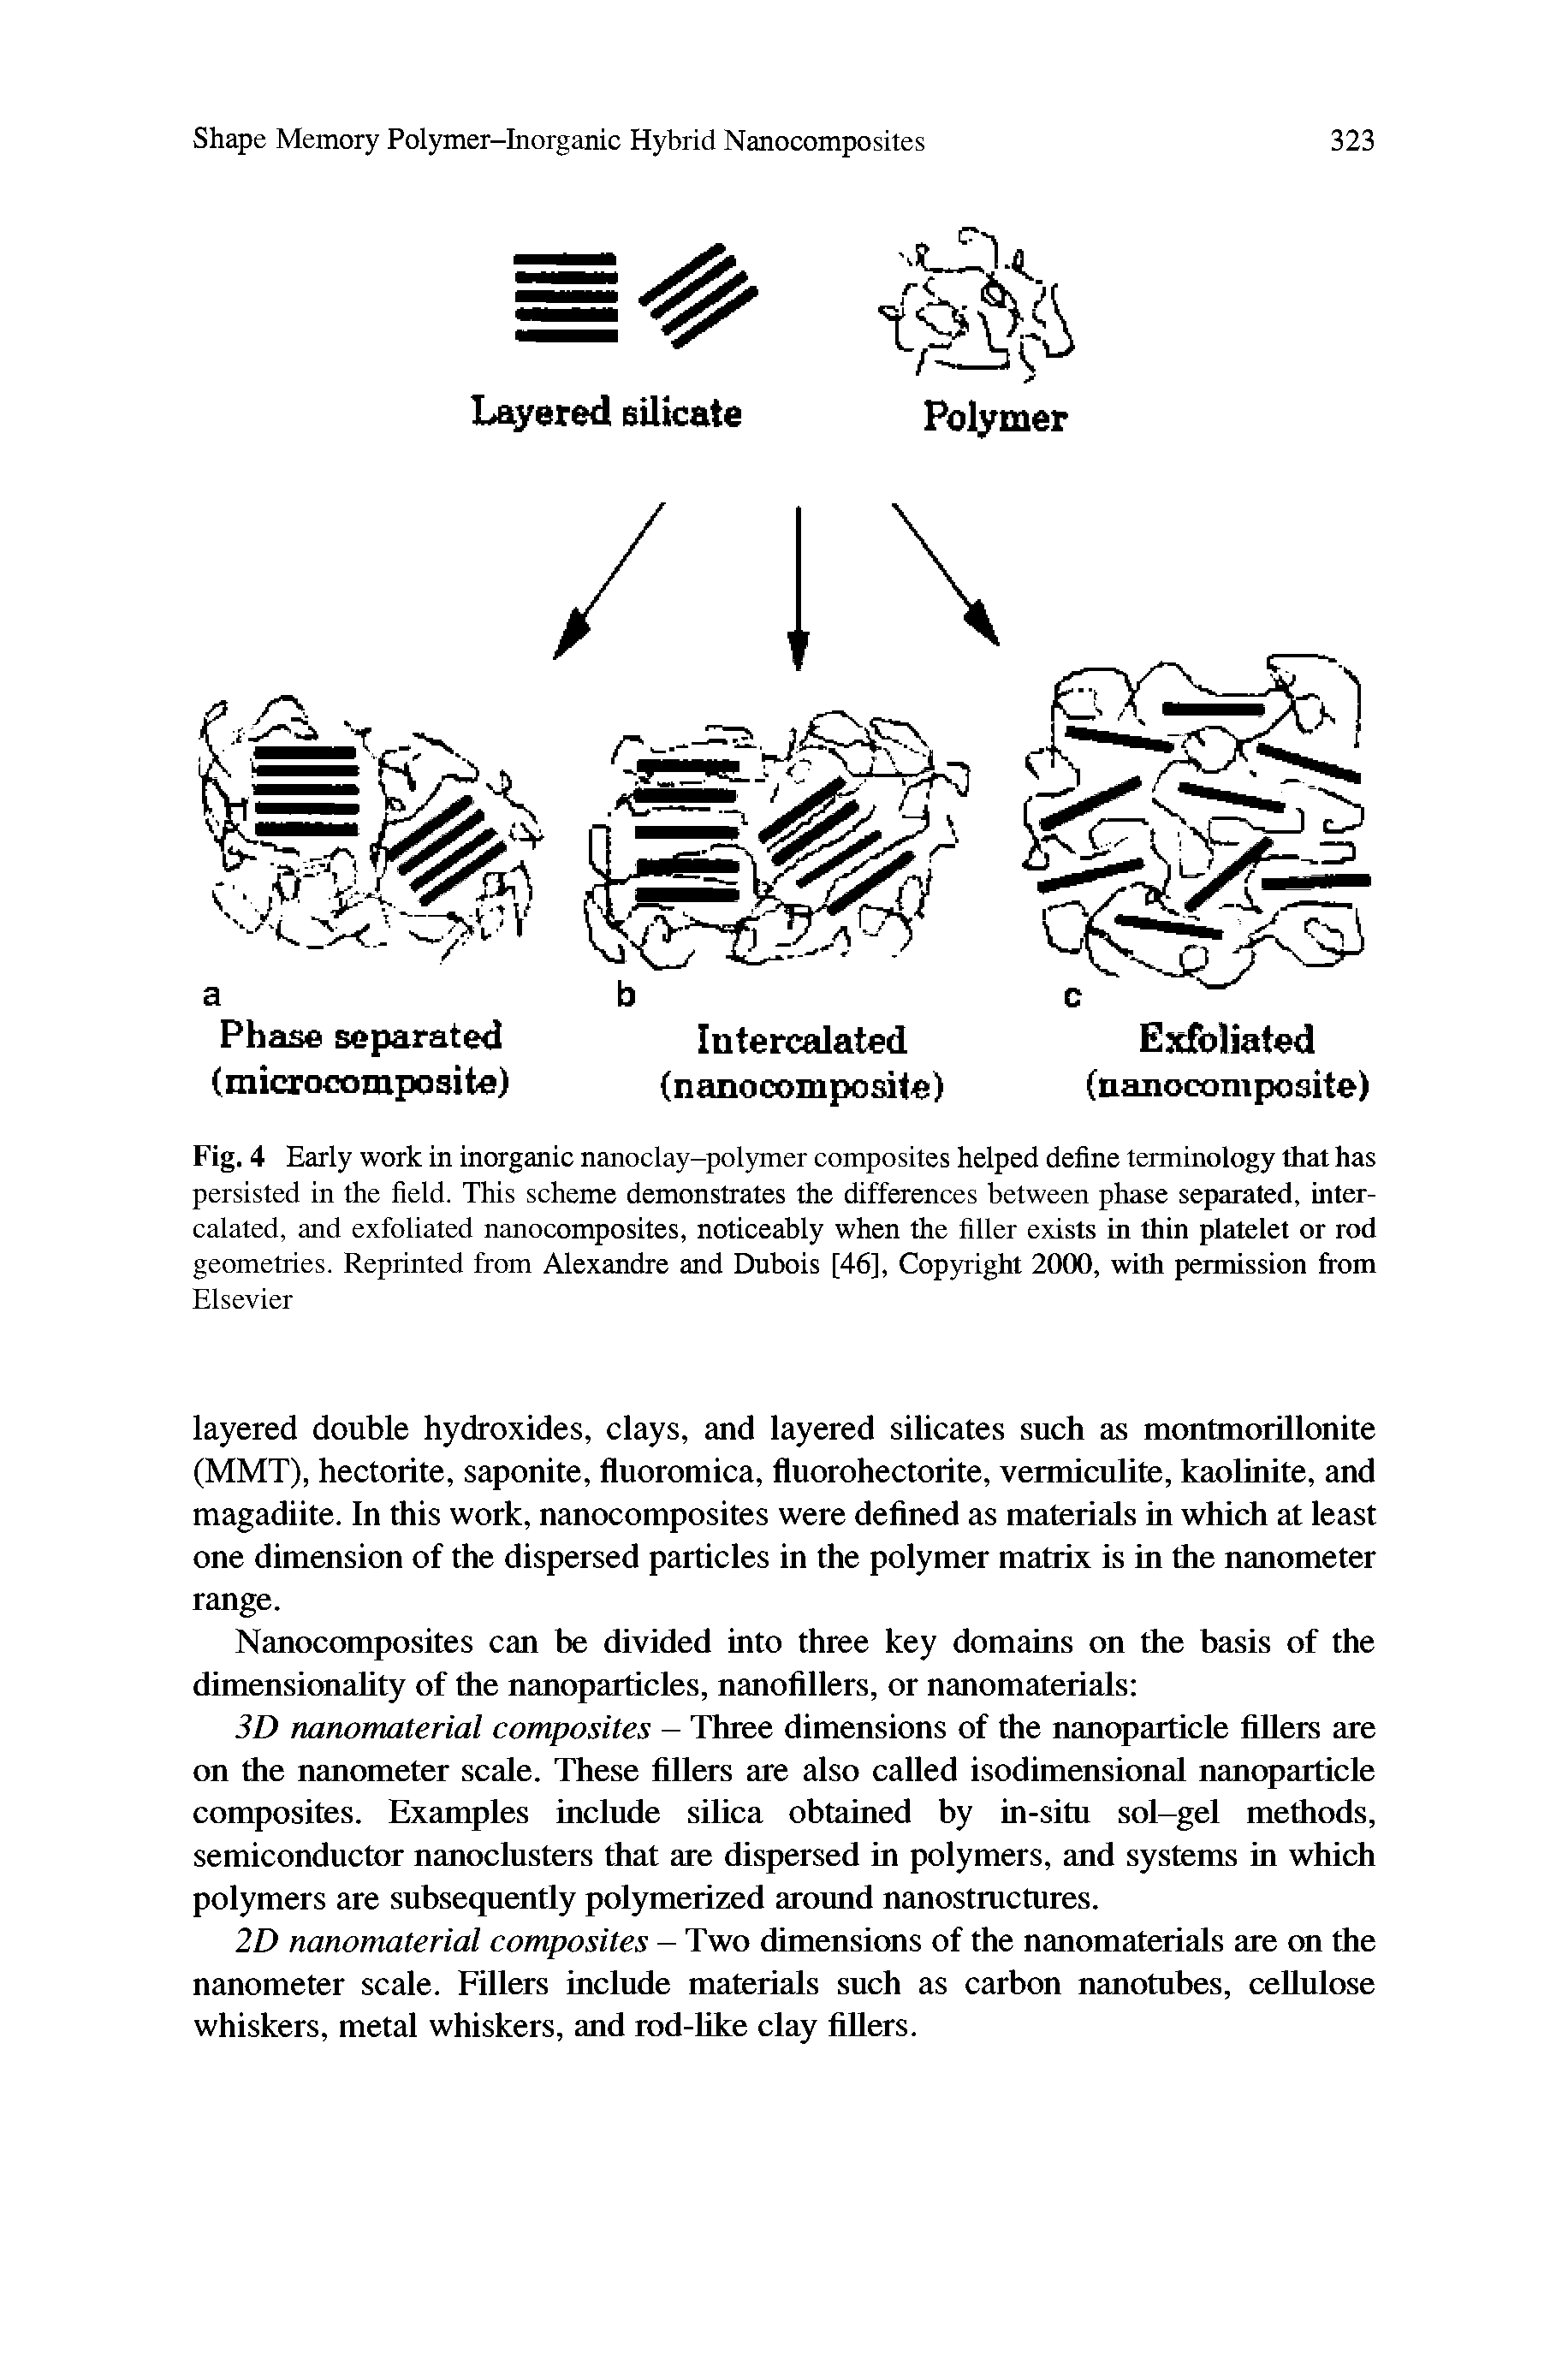 Fig. 4 Early work in inorganic nanoclay-polymer composites helped define terminology that has persisted in the field. This scheme demonstrates the differences between phase separated, intercalated, and exfoliated nanocomposites, noticeably when the filler exists in thin platelet or rod geometries. Reprinted from Alexandre and Dubois [46], Copyright 2000, with permission from...